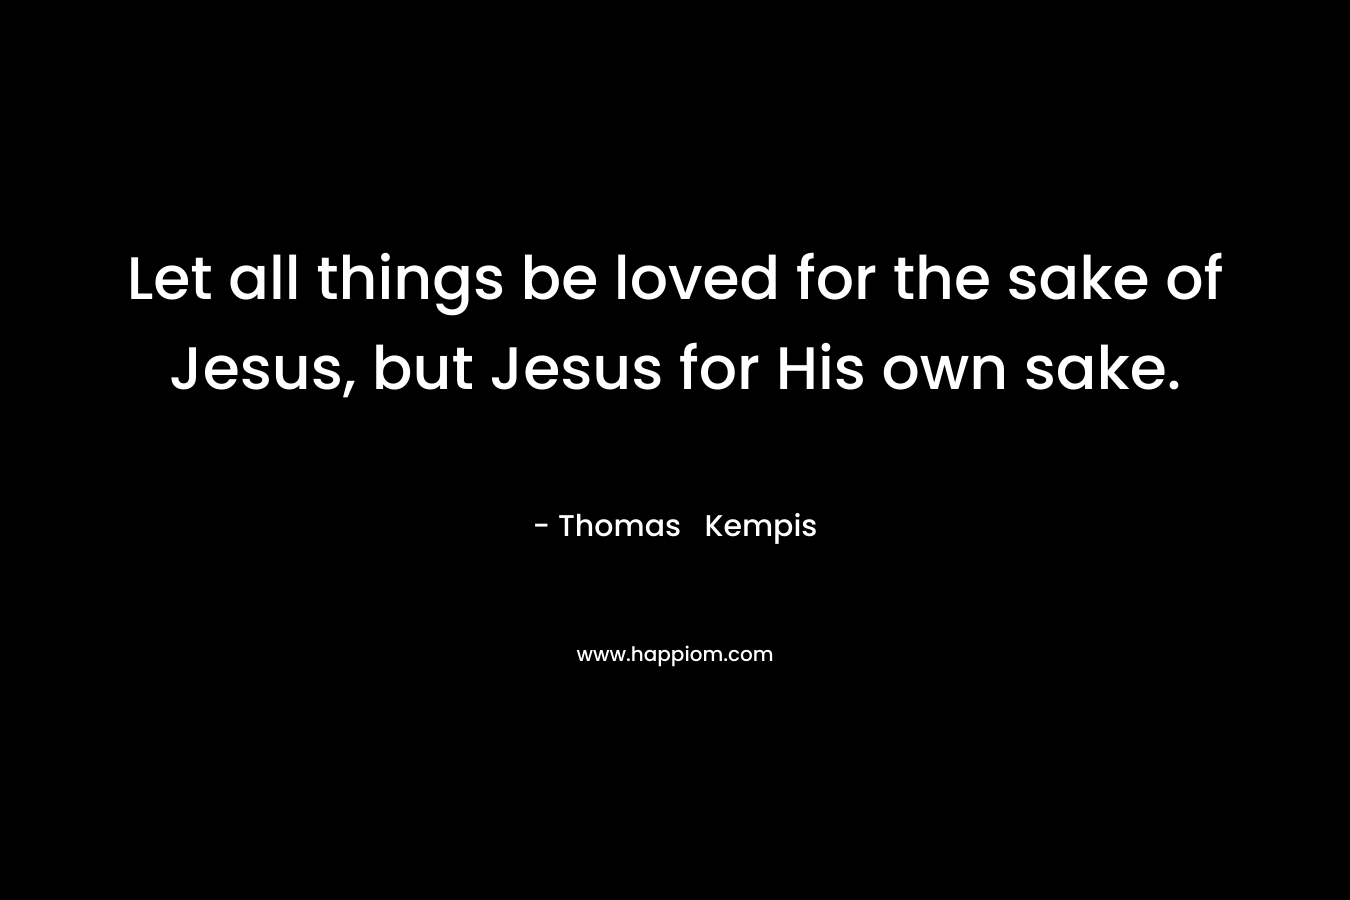 Let all things be loved for the sake of Jesus, but Jesus for His own sake.